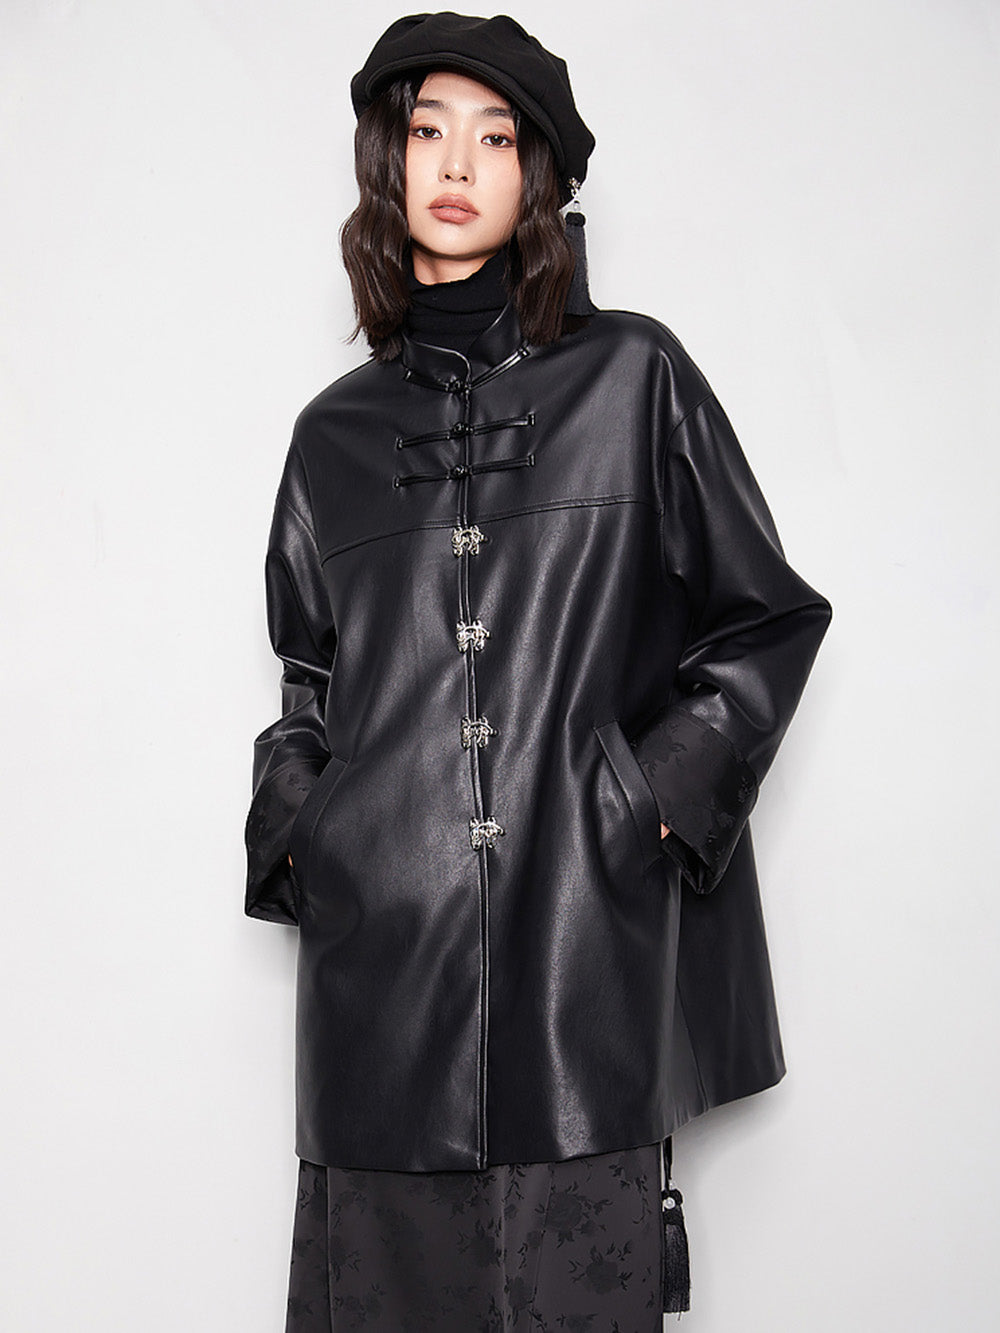 MUKTANK x CUUDICLAB Neo-Chinese Style Leather Coat